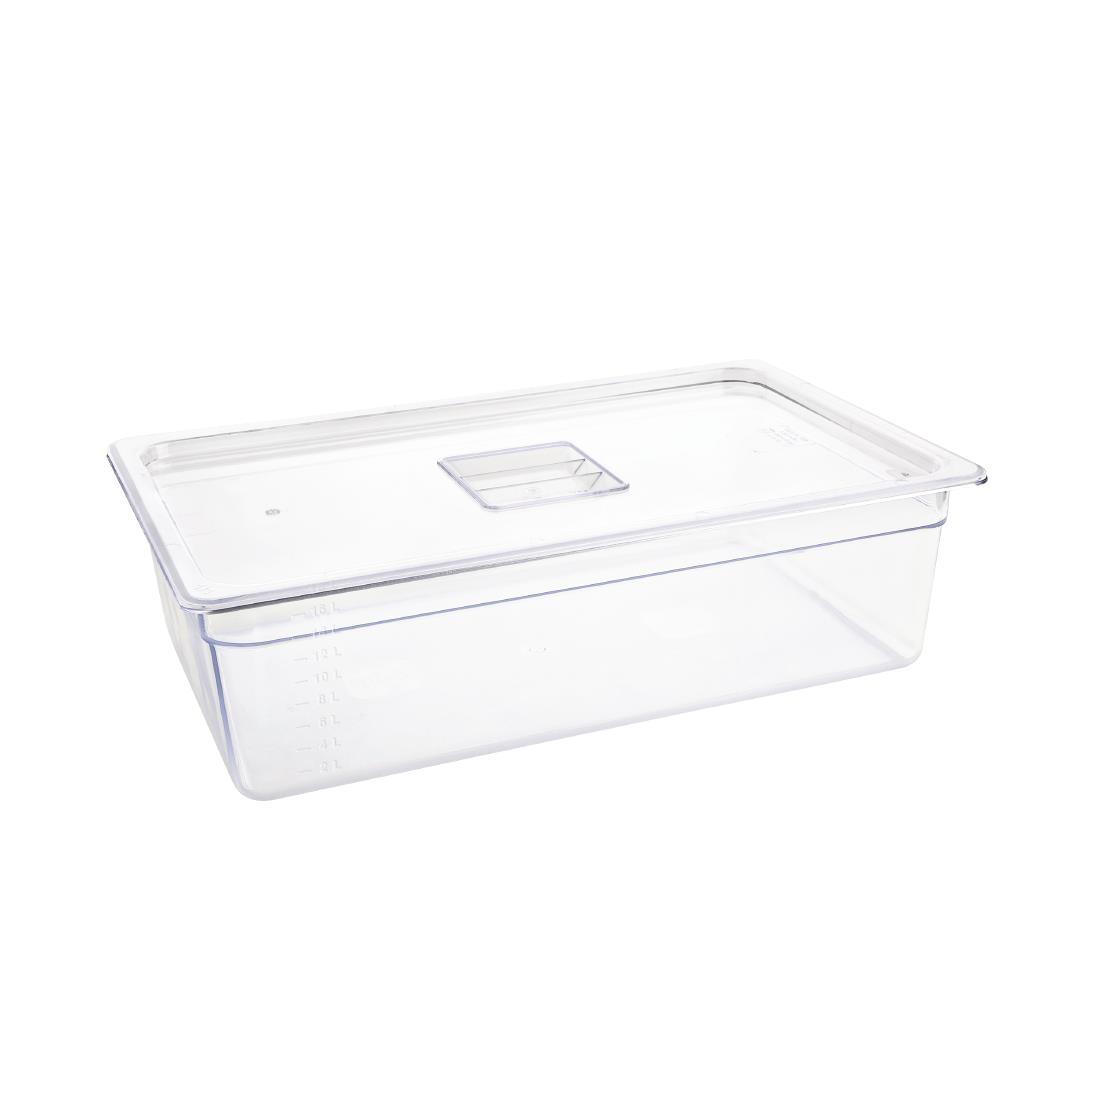 Vogue Polycarbonate 1/1 Gastronorm Container 150mm Clear - U226  - 2